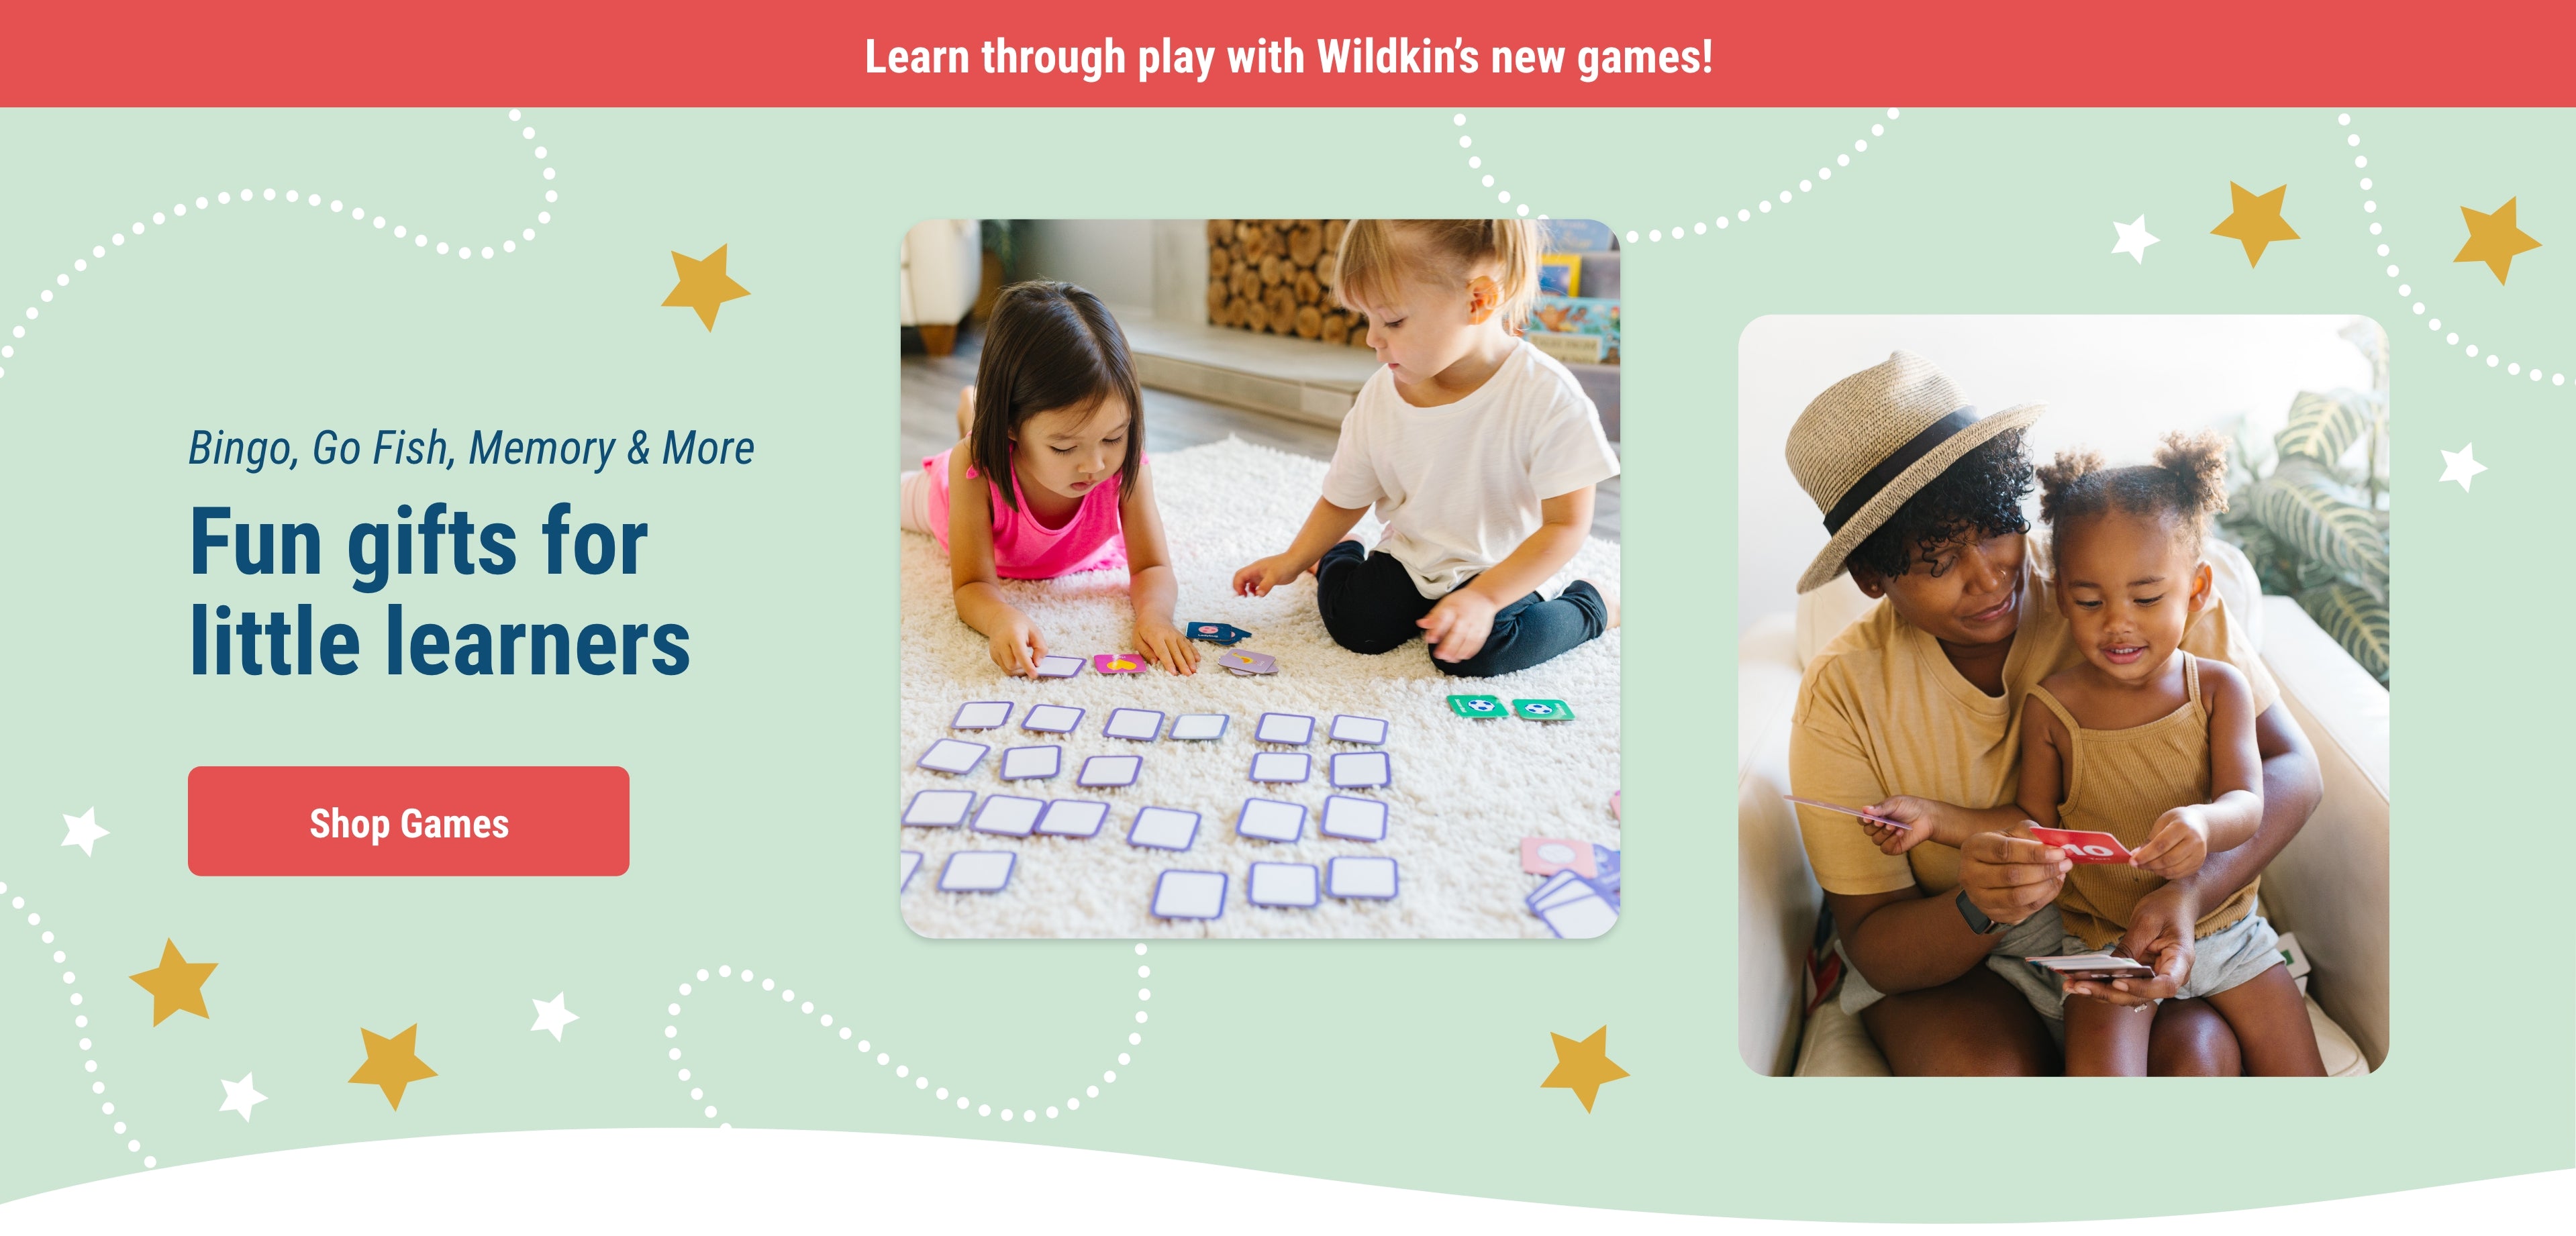 Bingo, Go Fish, Memory and More. Fun Gifts for little learners. Link to shop games. Images of 2 girls playing memory matching games on the floor. Image of a a mother and daughter playing with Toddler Flashcards